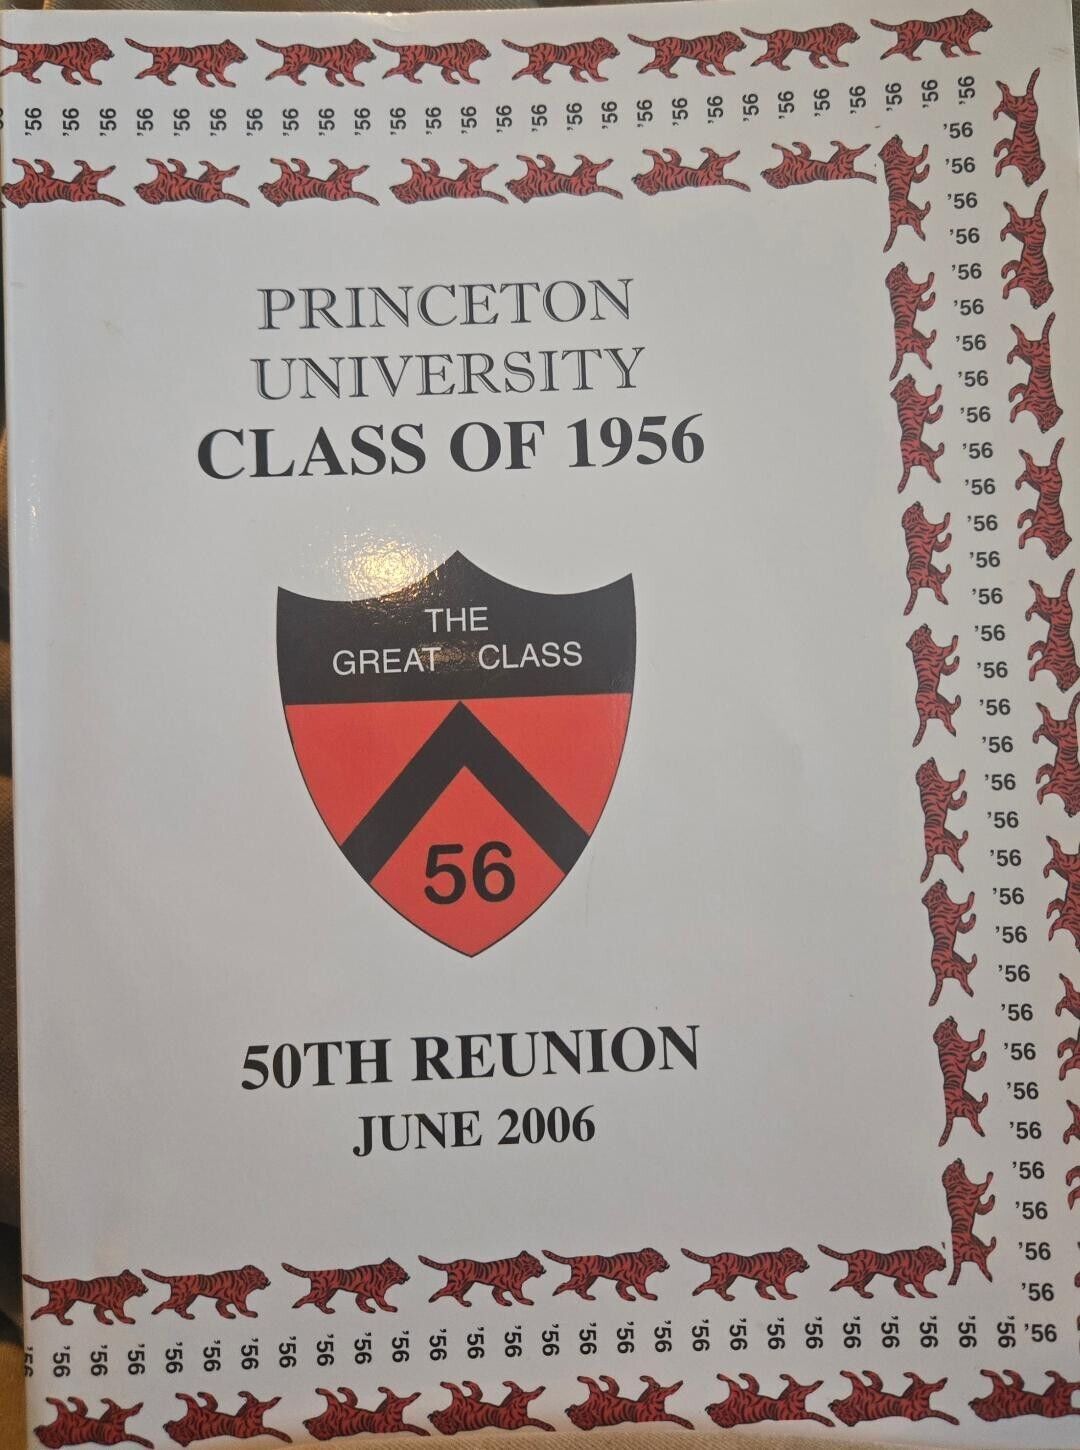 Princeton University Class of 1956 - 50th Reunion Book from June 2006